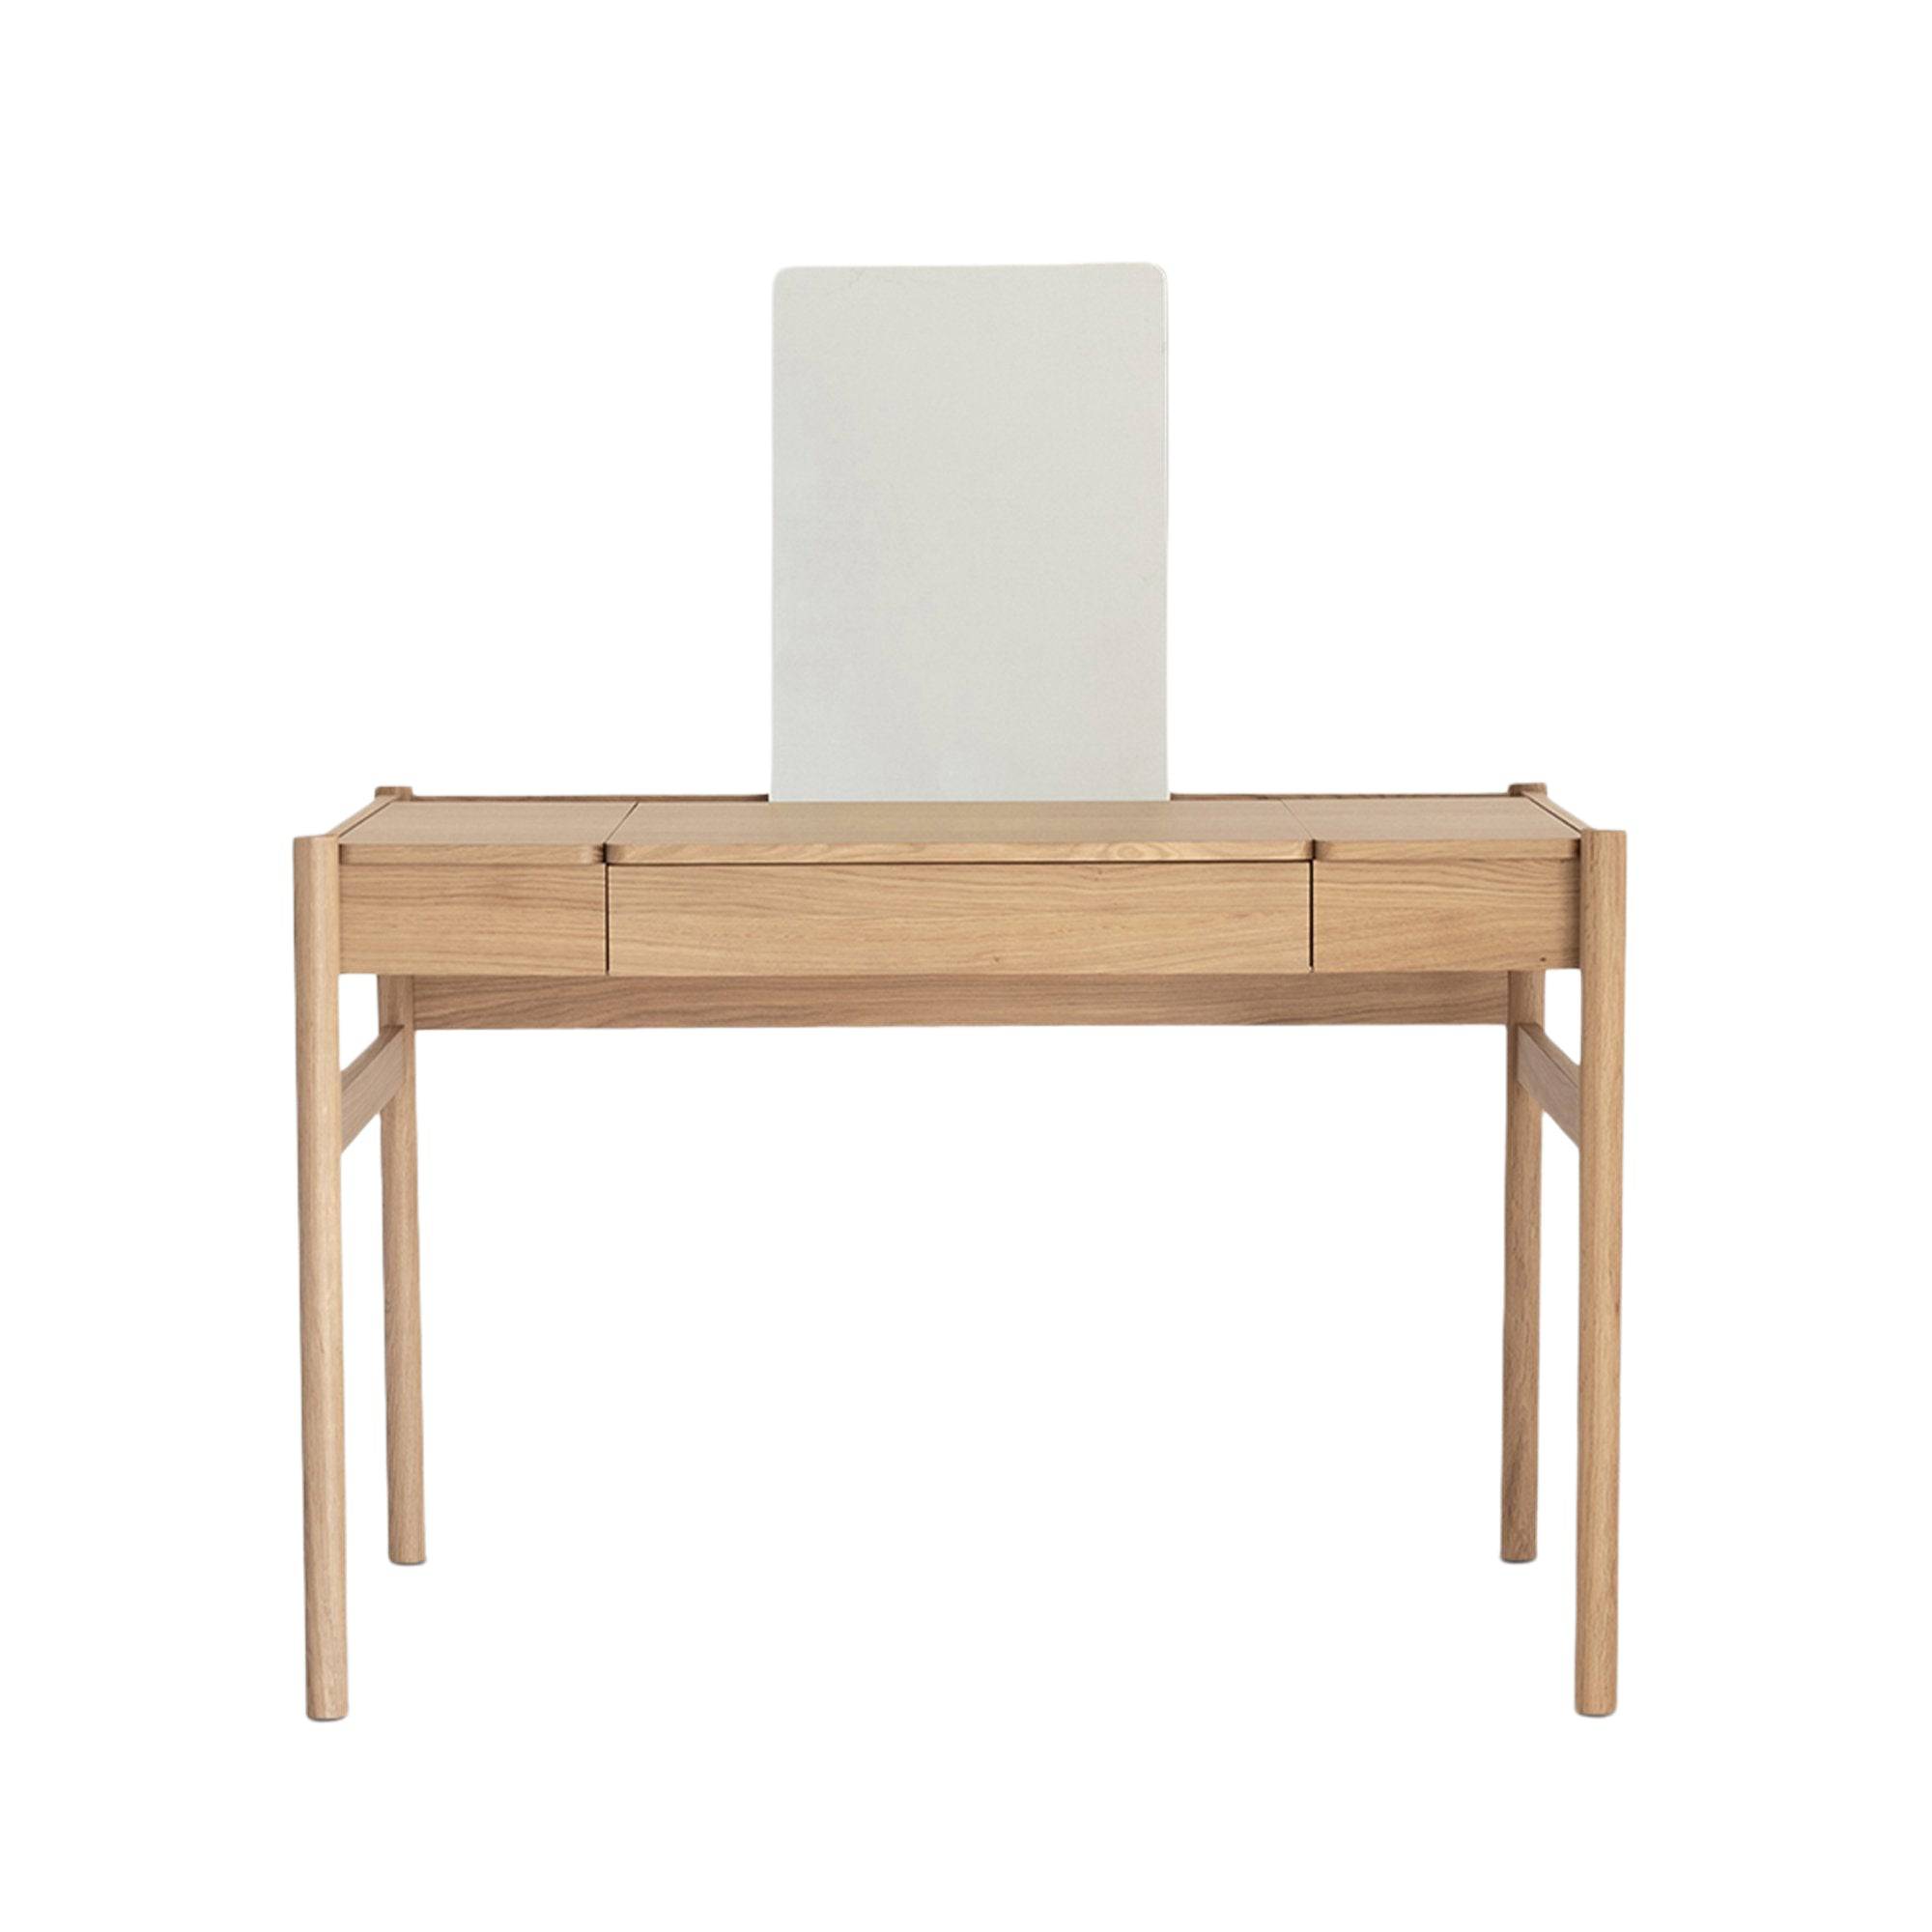 Pala Dressing Table - THAT COOL LIVING